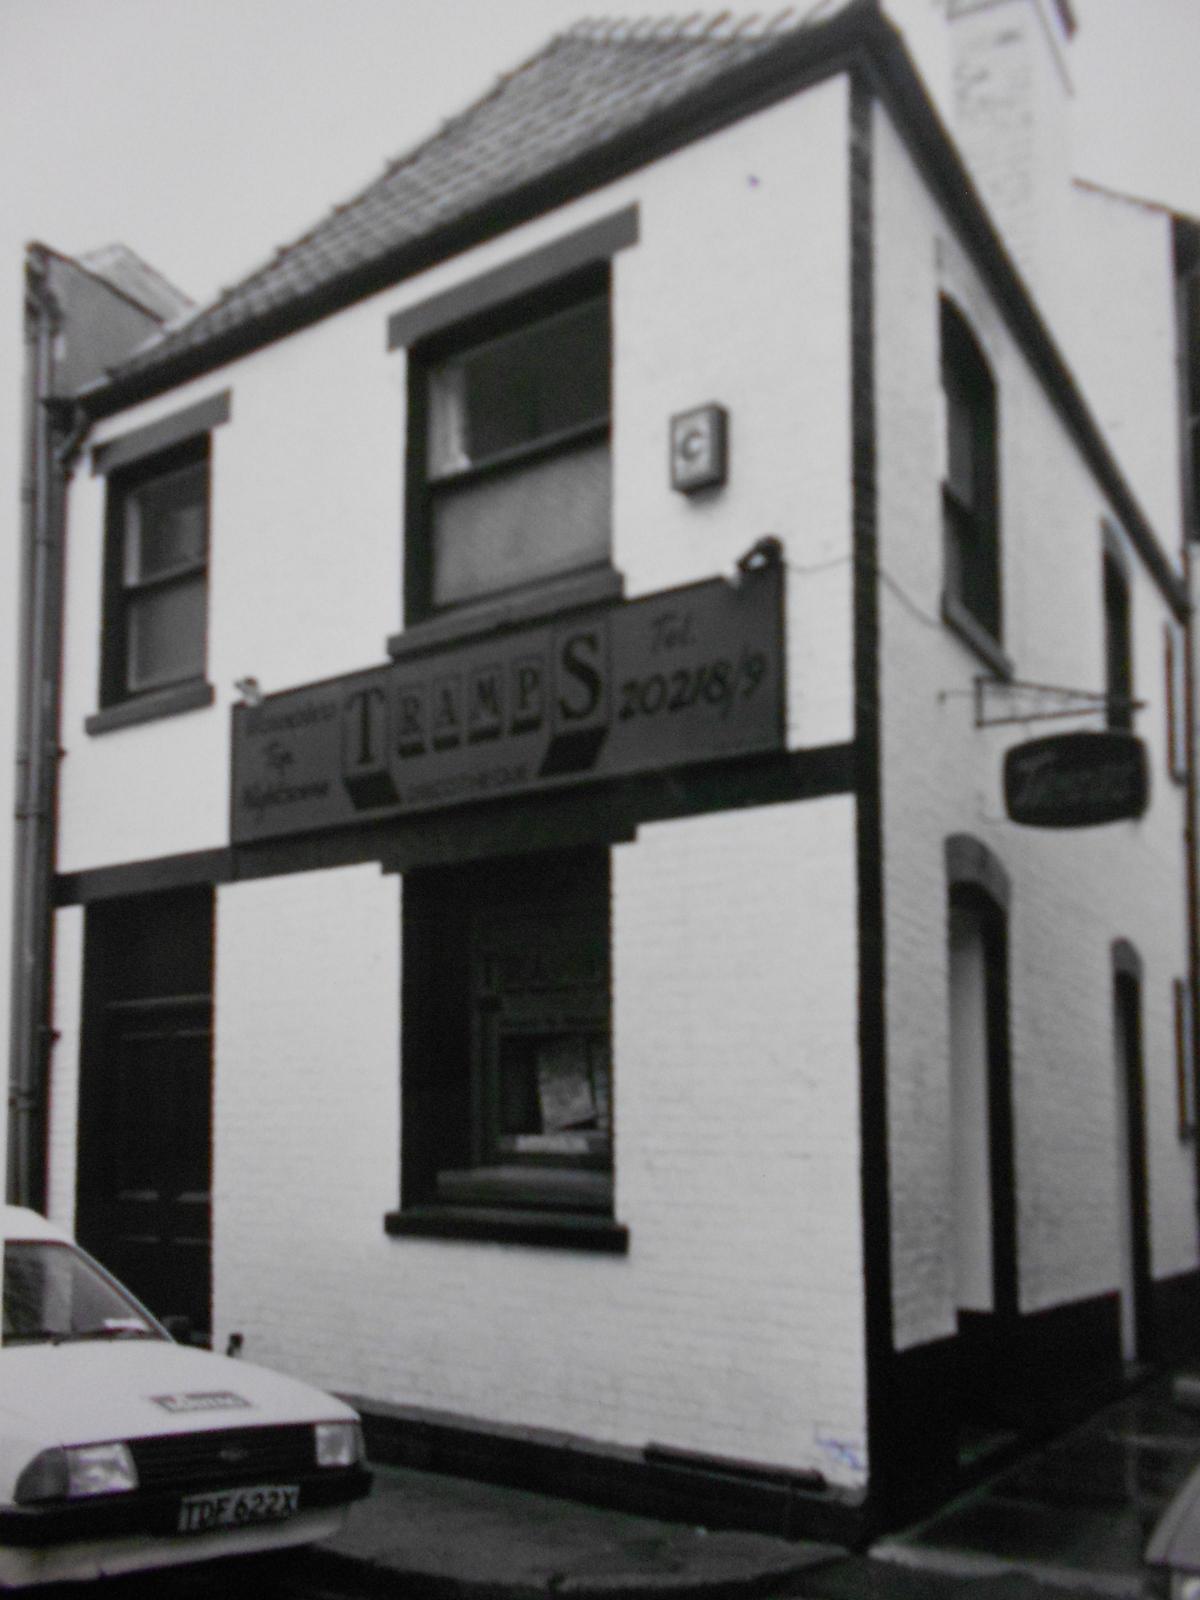 Do you remember the first Tramps nightclub in Bank Street?